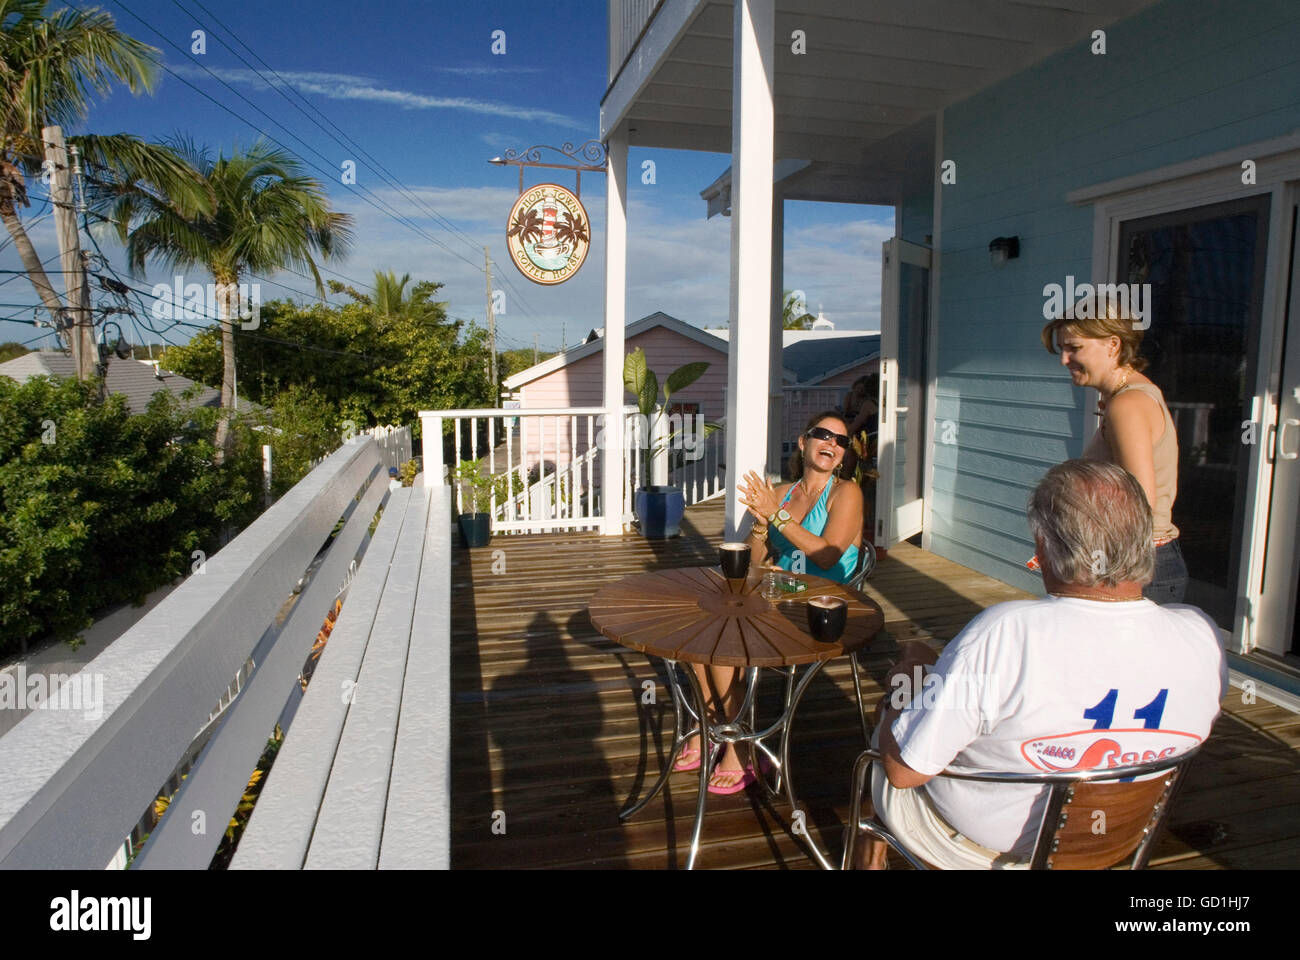 Coffee house. Hope Town, Elbow Cay, Abacos. Bahamas. Stock Photo